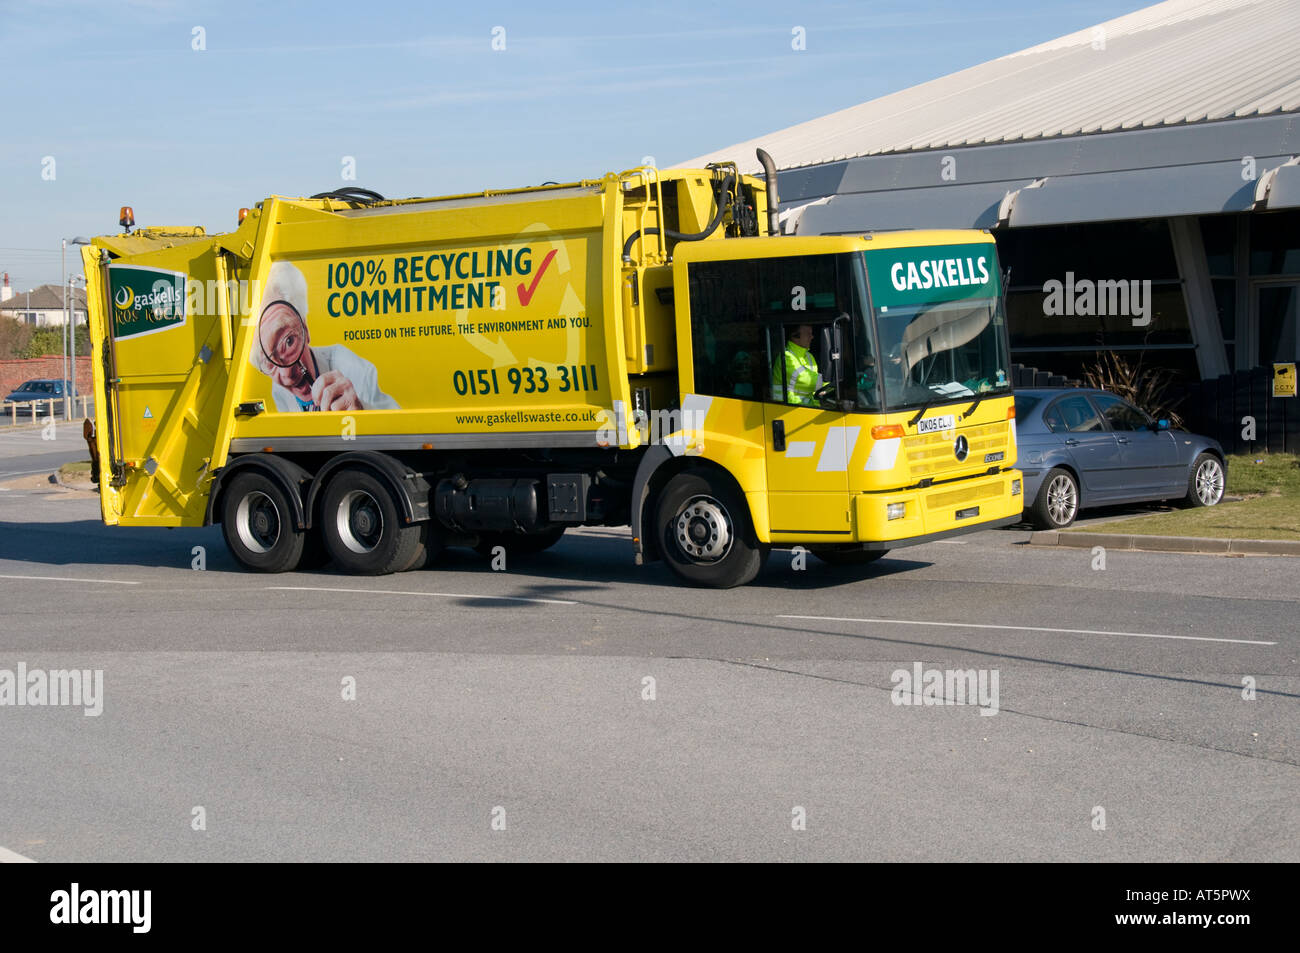 Yellow Gaskells recycling truck pulling into Crosby leisure centre Sefton Merseyside UK Stock Photo